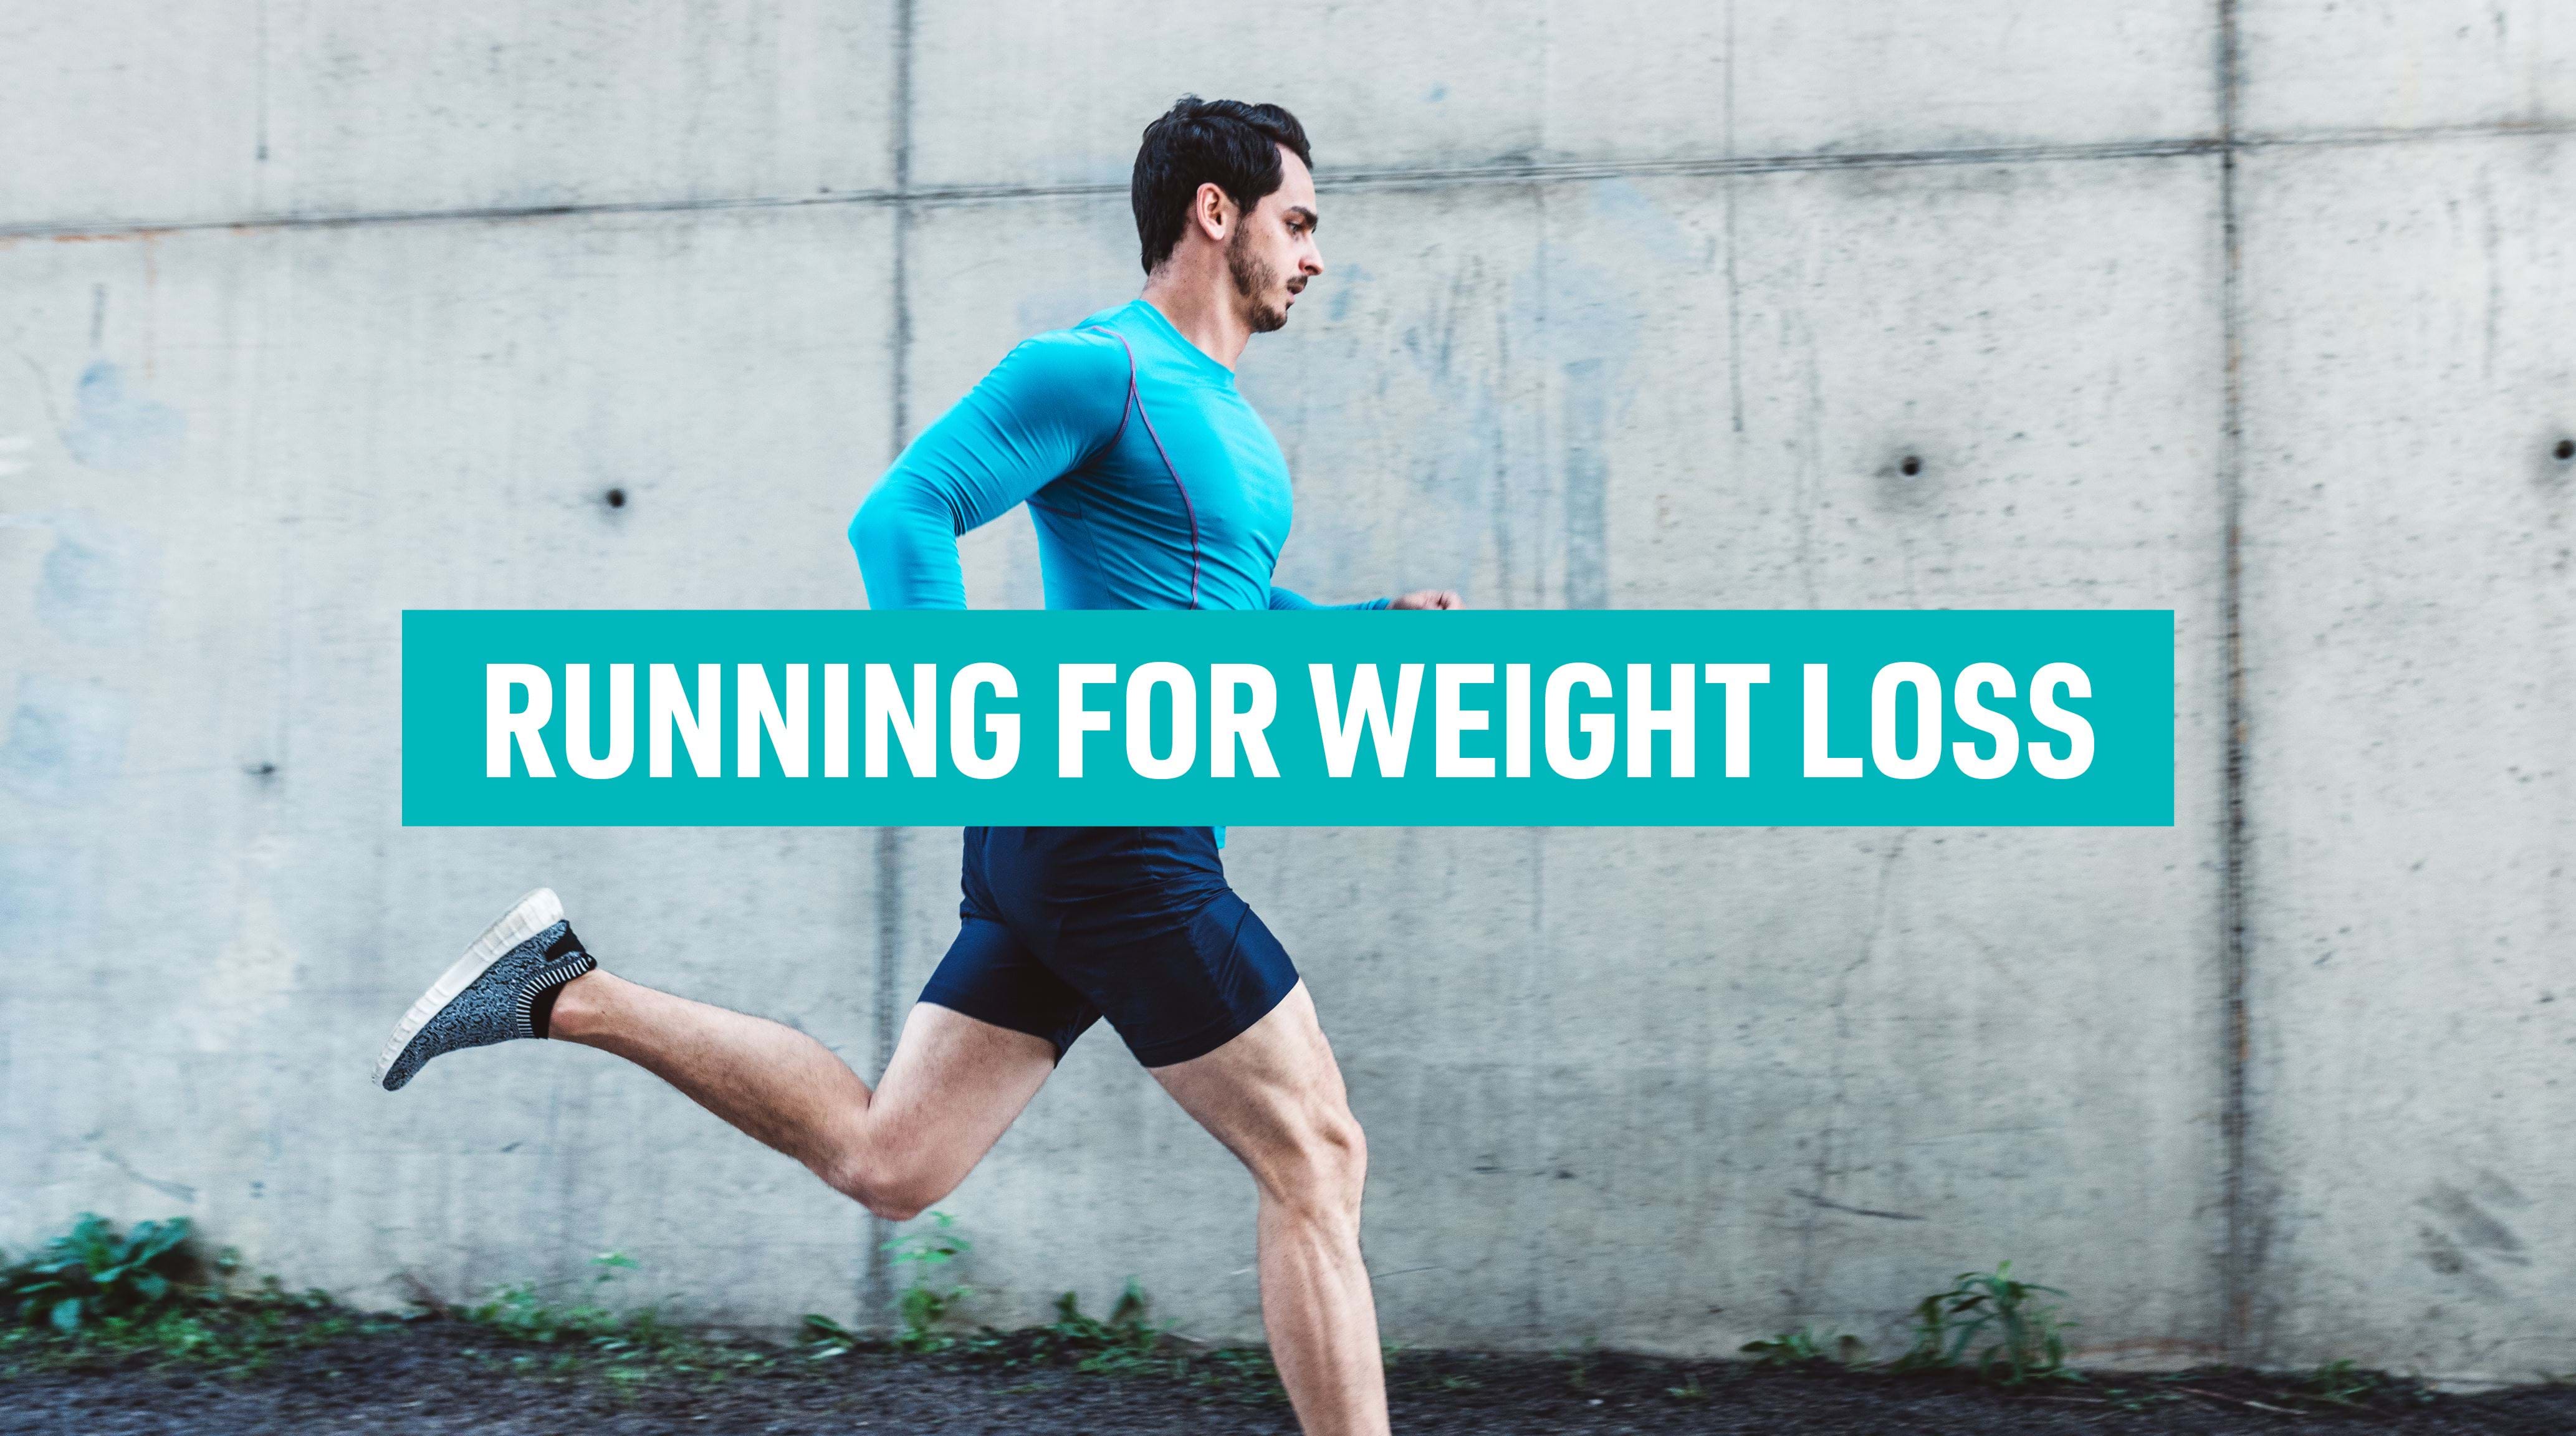 Here's What 30 Minutes of Running Every Day Does For Weight Loss